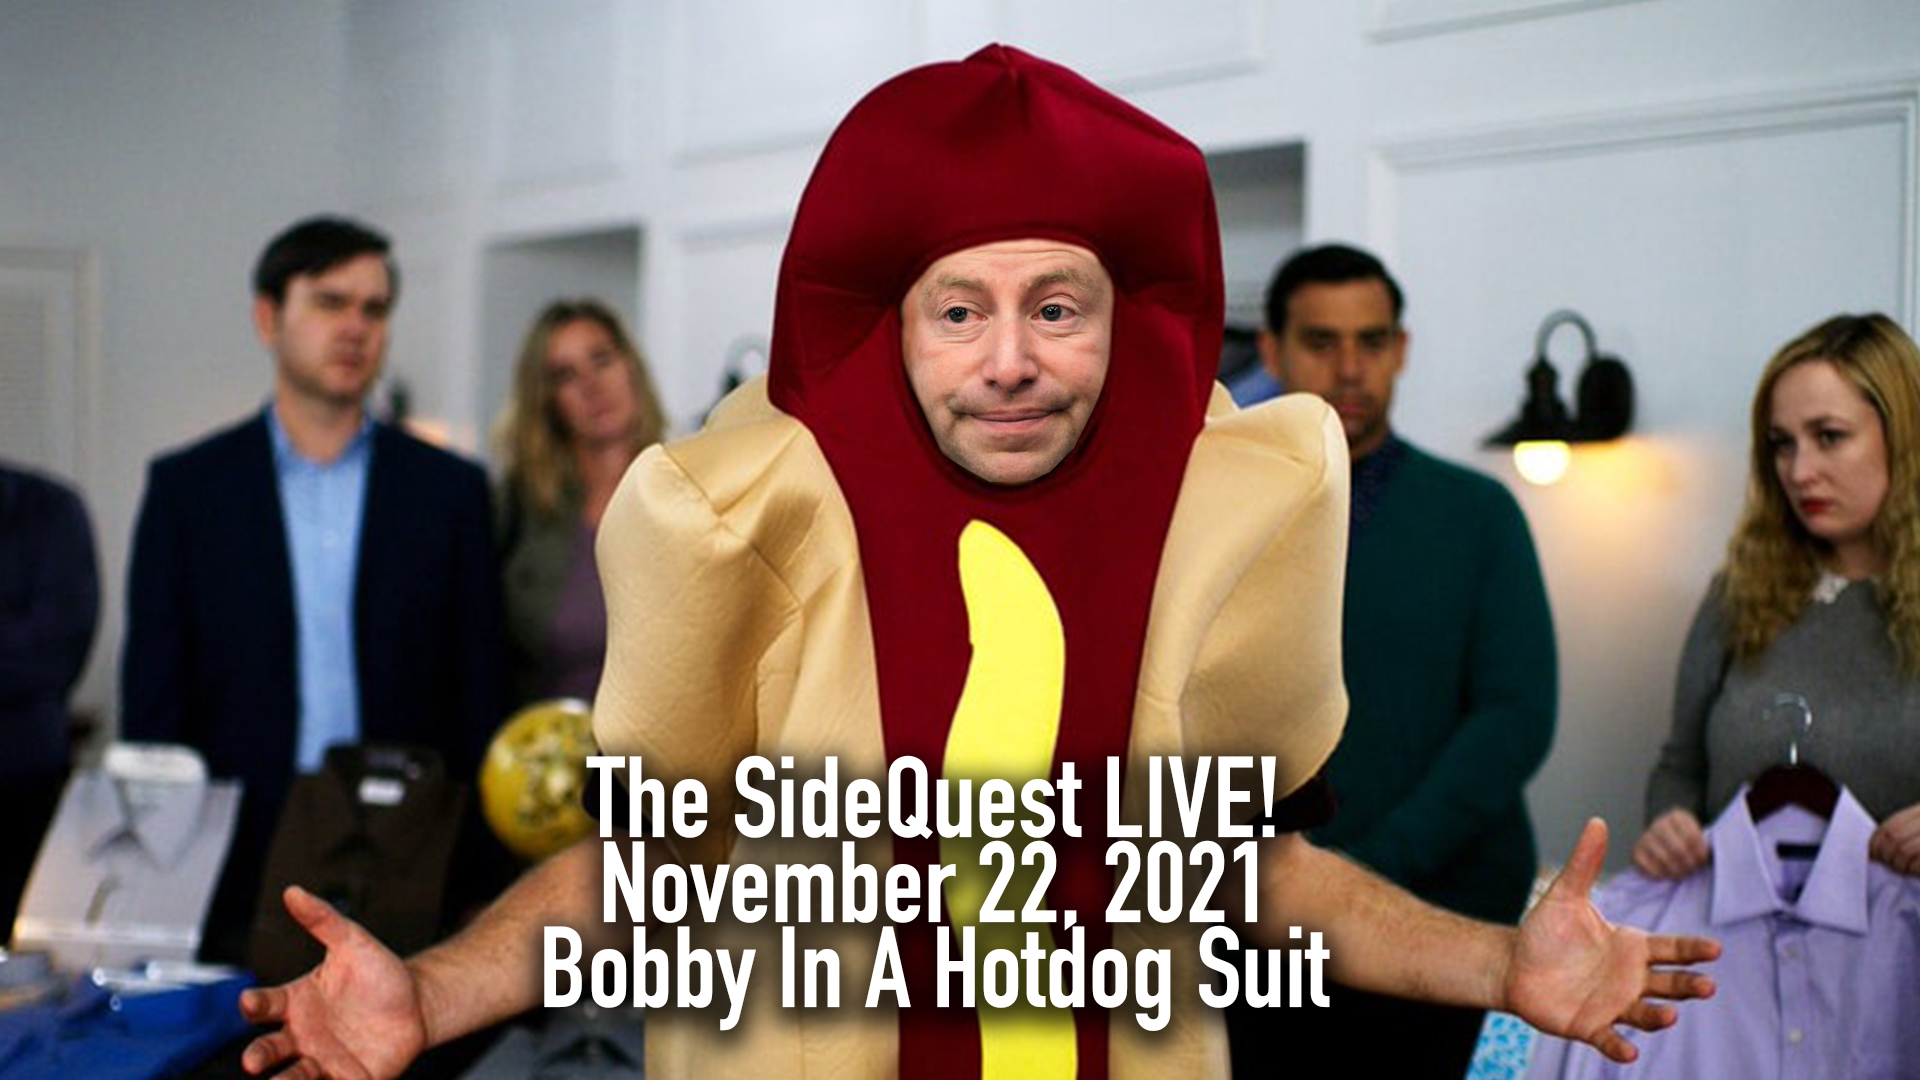 The SideQuest LIVE! November 22, 2021: Bobby In A Hotdog Suit